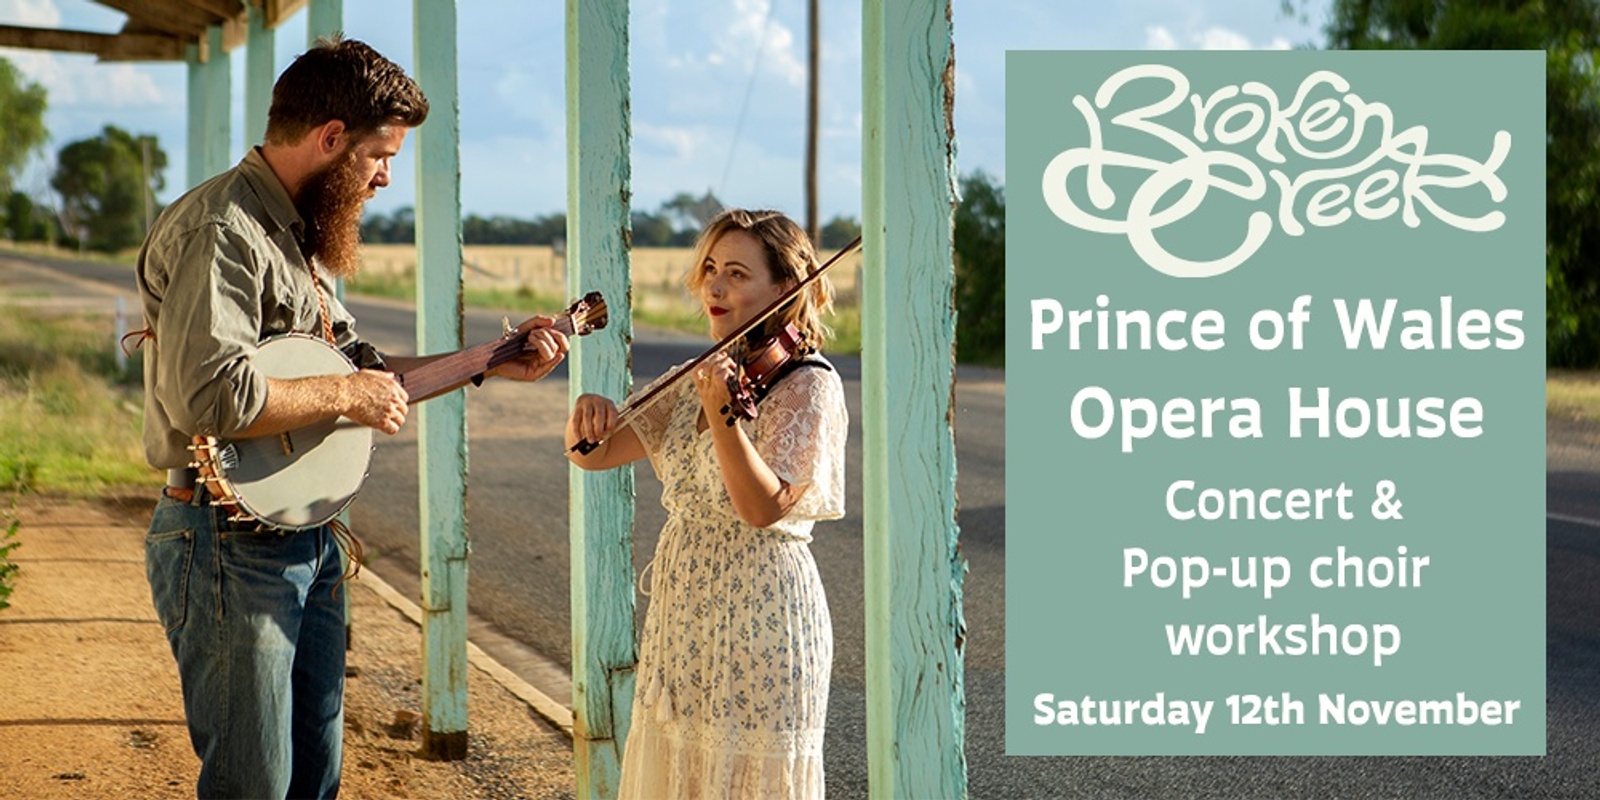 Banner image for Broken Creek Concert and Pop-Up Choir Workshop at the Prince of Wales Opera House